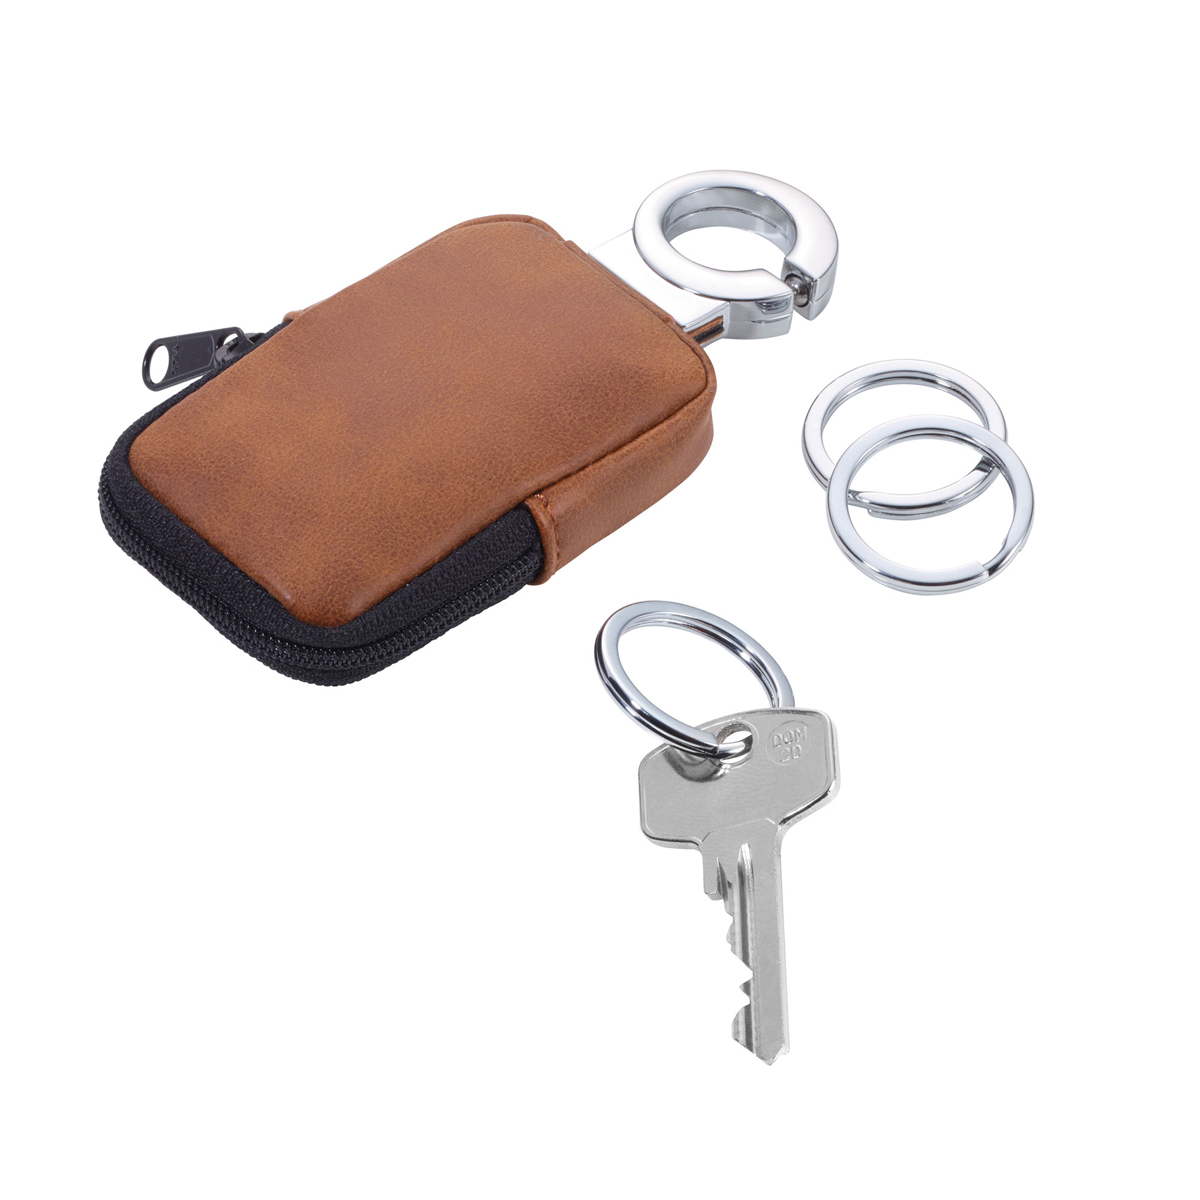 Troika - Keyring - Brown leather case